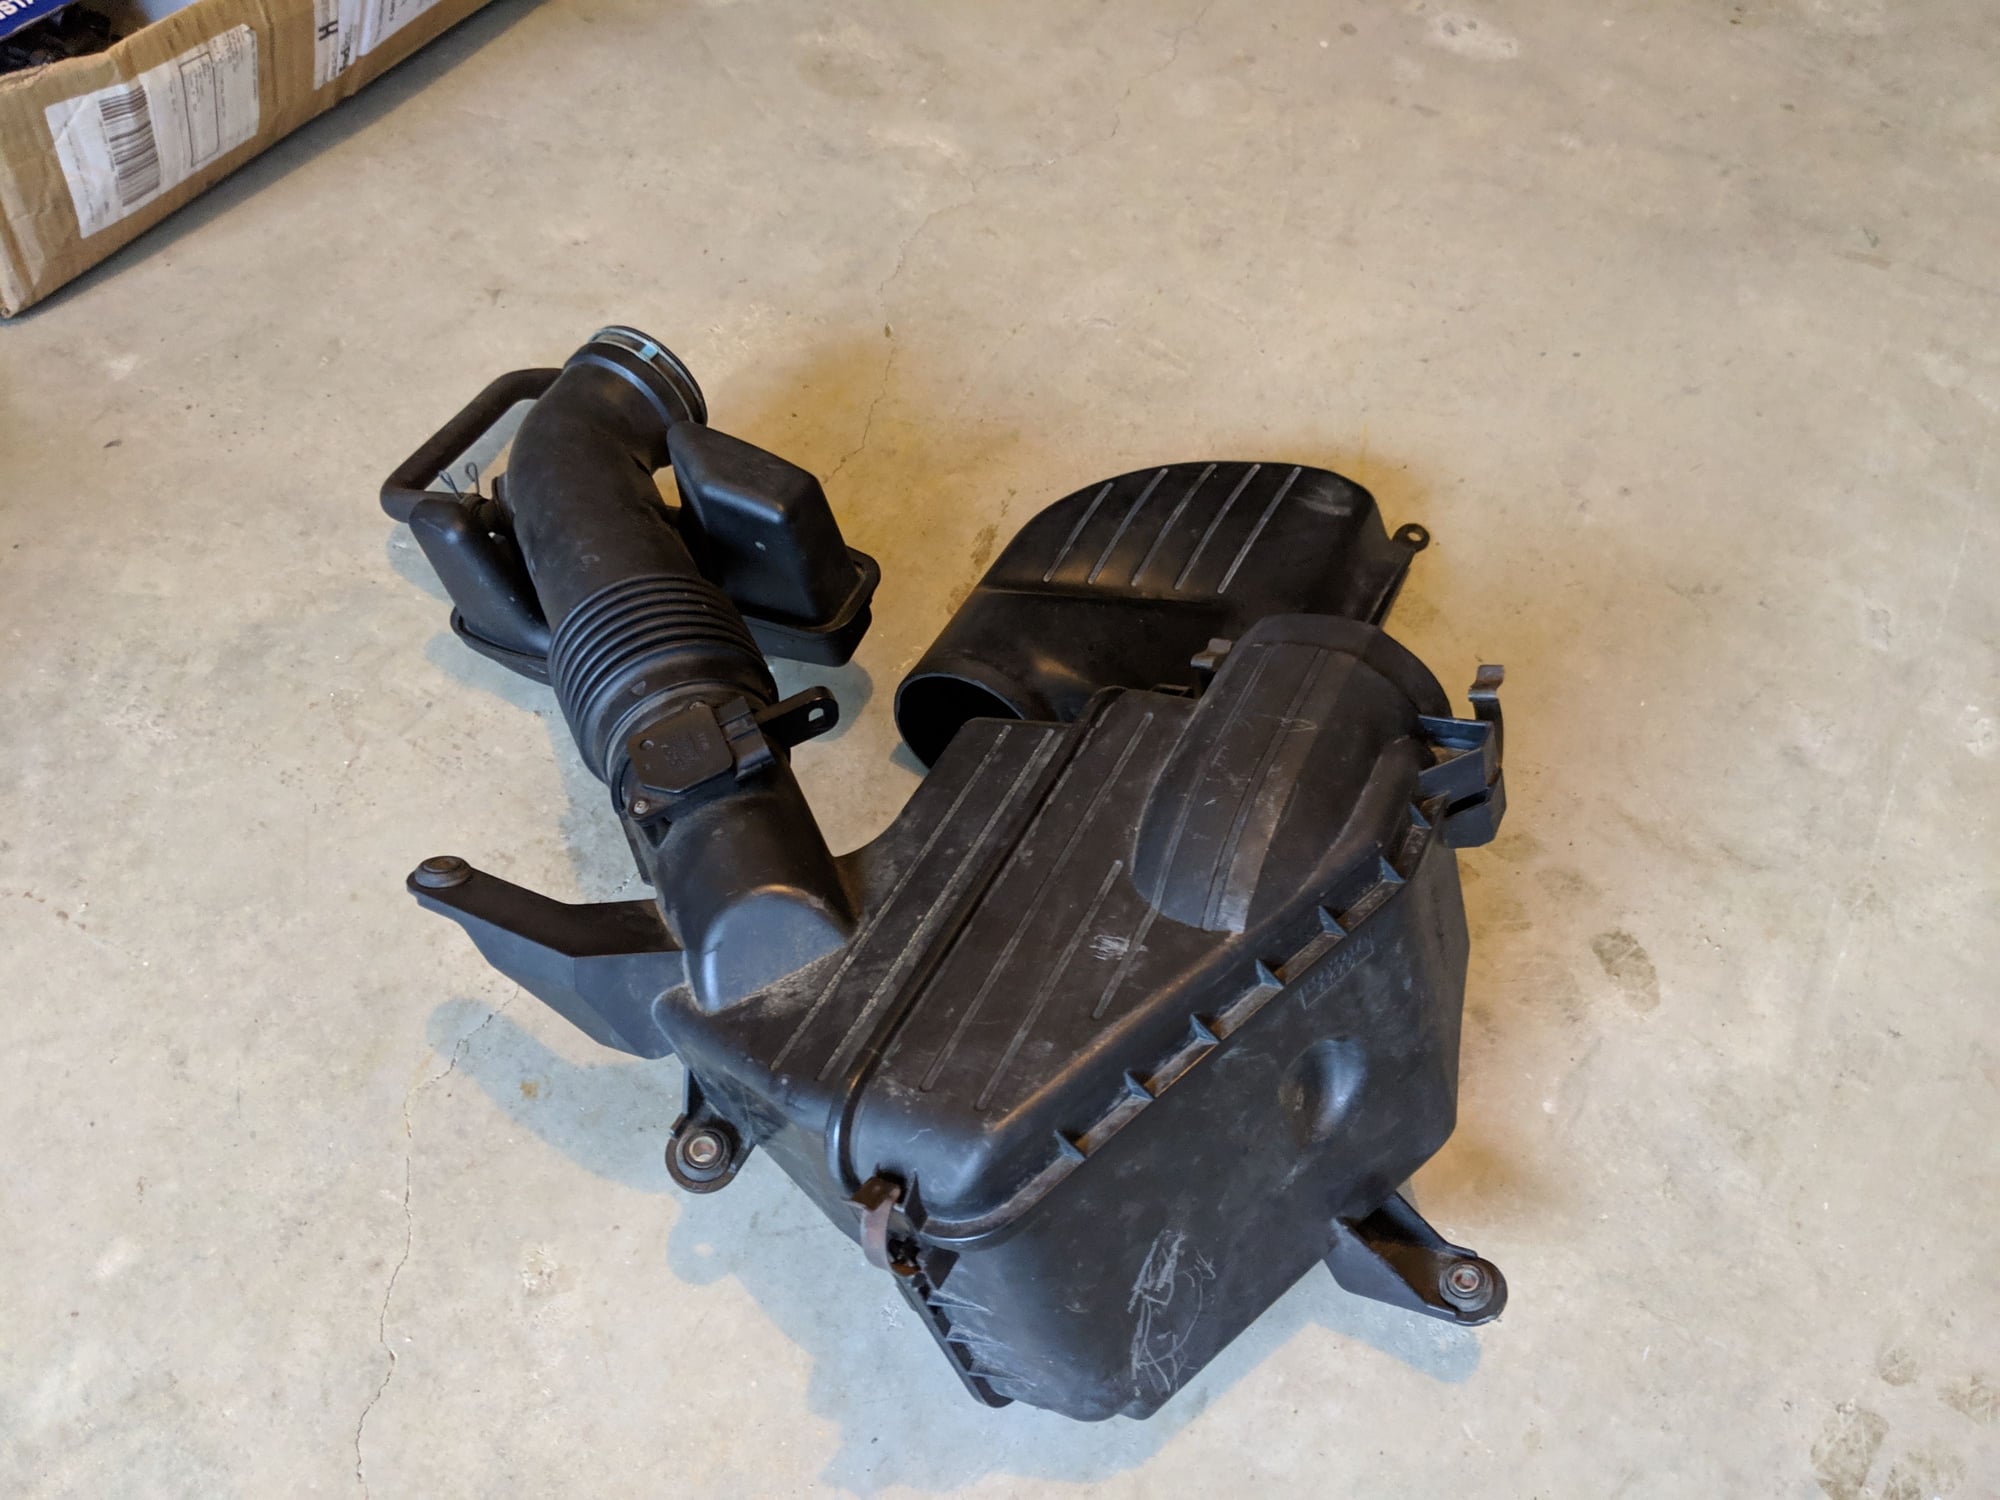 Engine - Intake/Fuel - 01-05 IS300 OEM Intake/Airbox - Used - 2001 to 2005 Lexus IS300 - Mason, OH 45040, United States